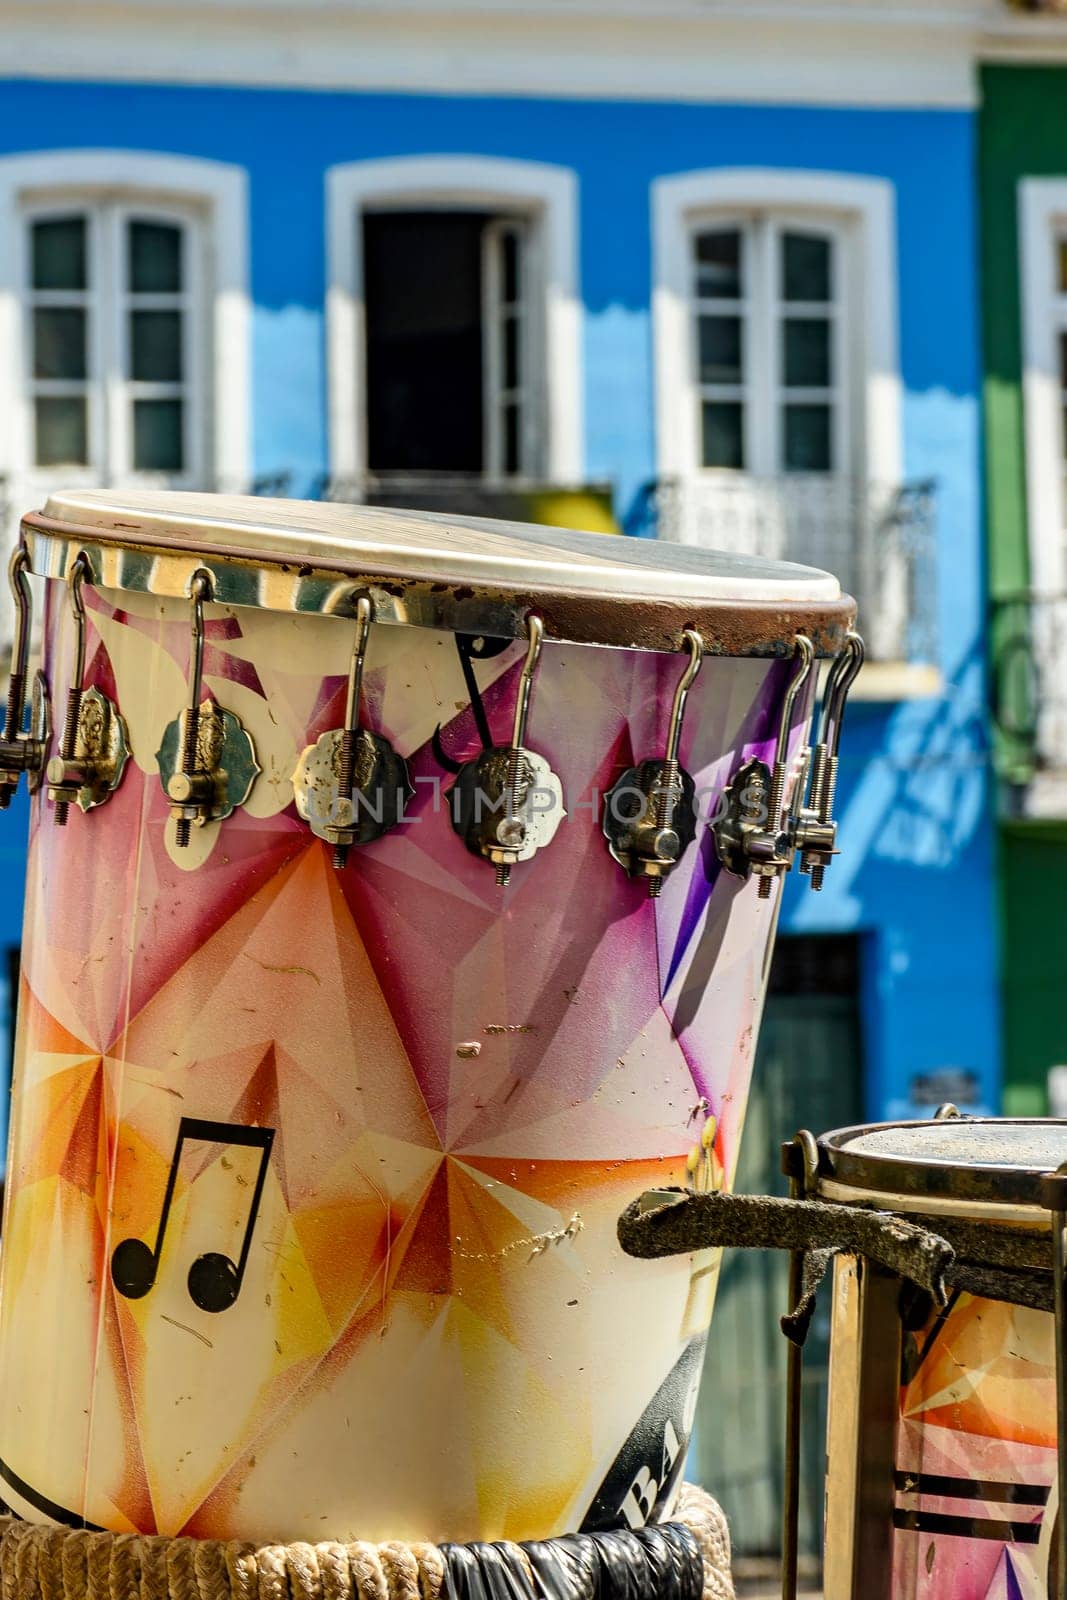 Traditional colorful and handcrafted drums by Fred_Pinheiro